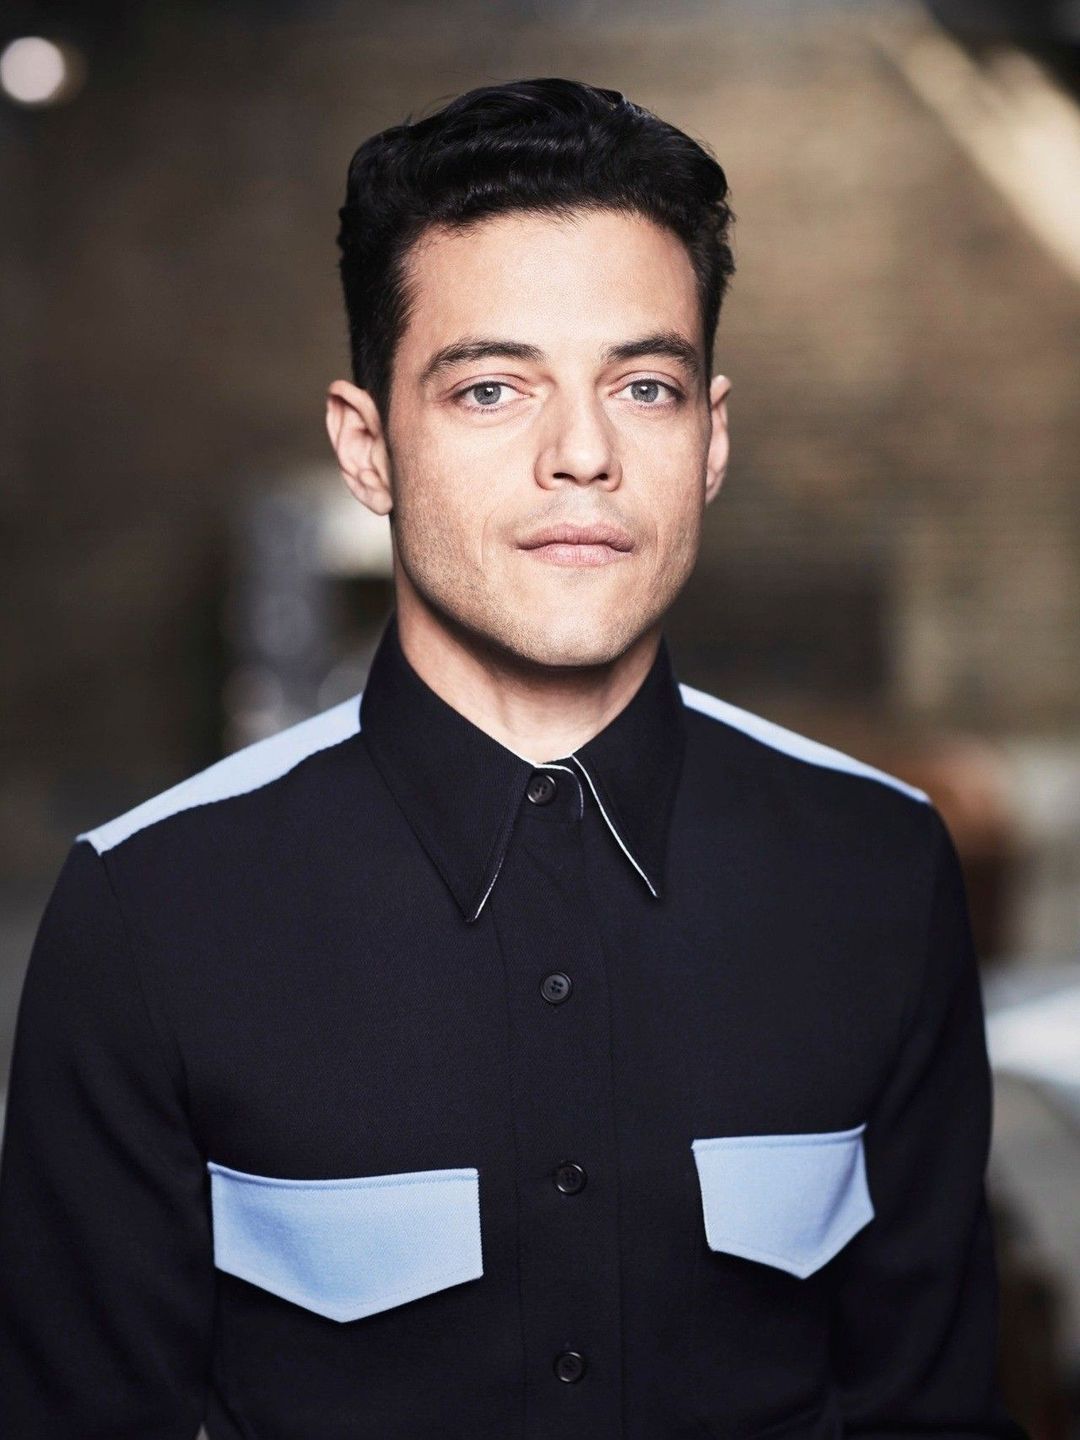 Rami Malek how did he became famous